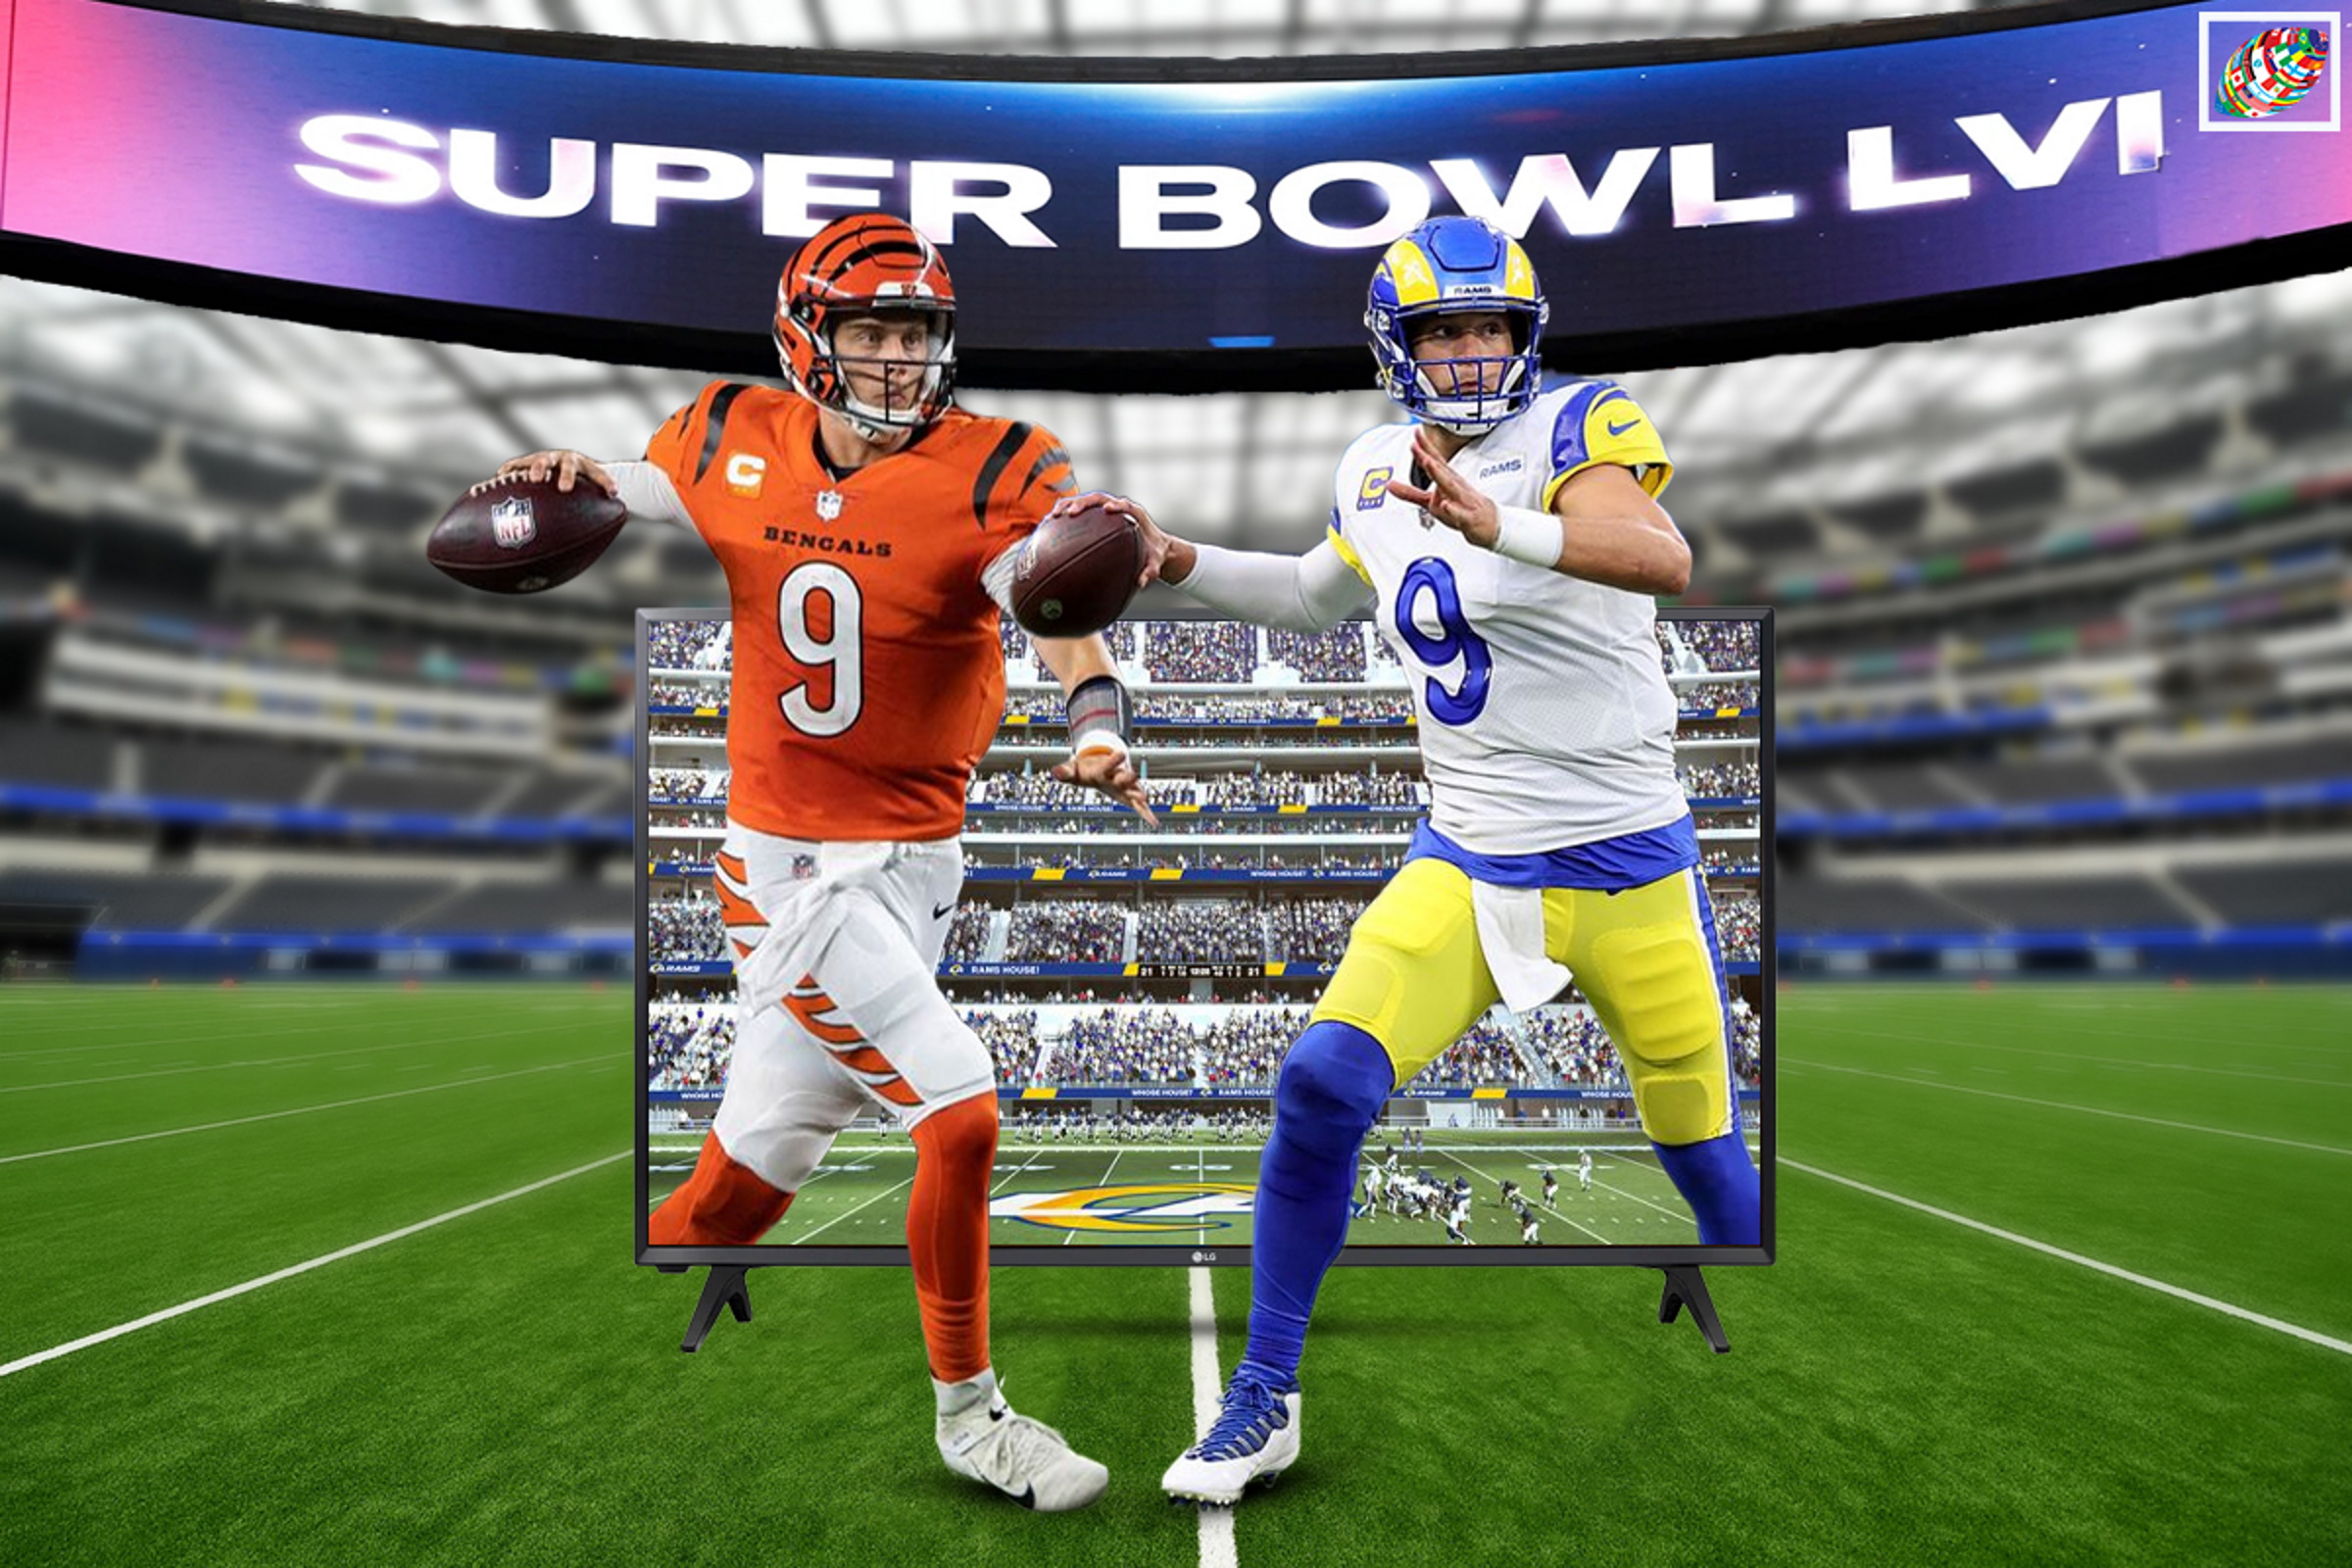 Super Bowl LVI - Best way for international fans to watch the game